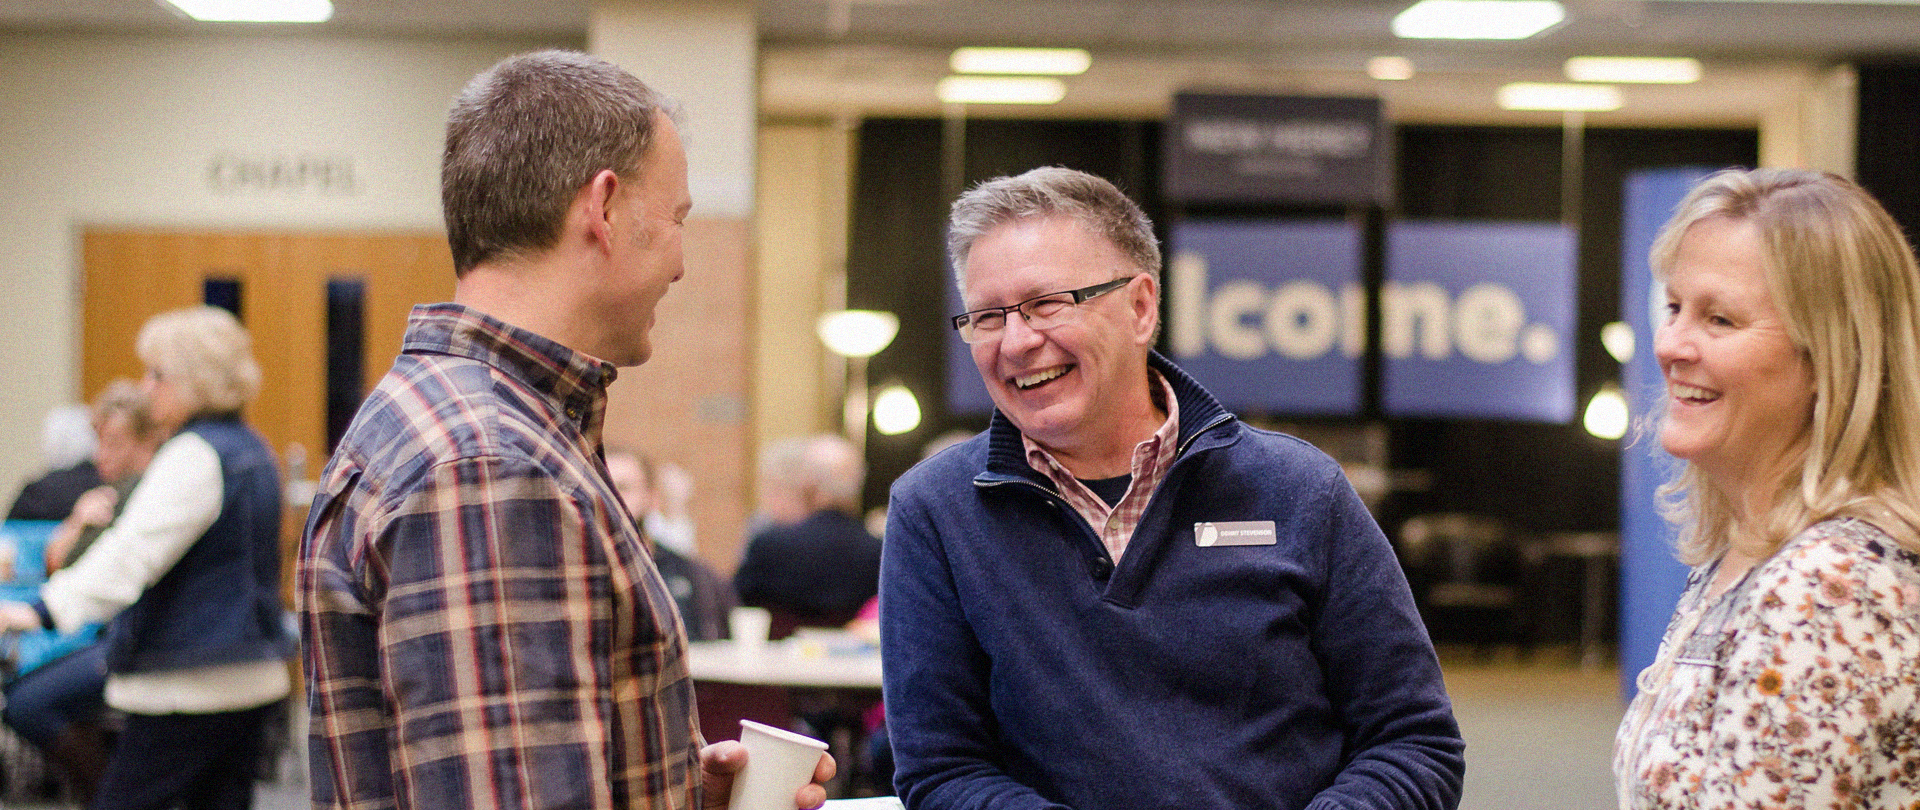 Get Connected!
Starting Point Conversation
Membership At Crossroads
Serve Tour
Explore
